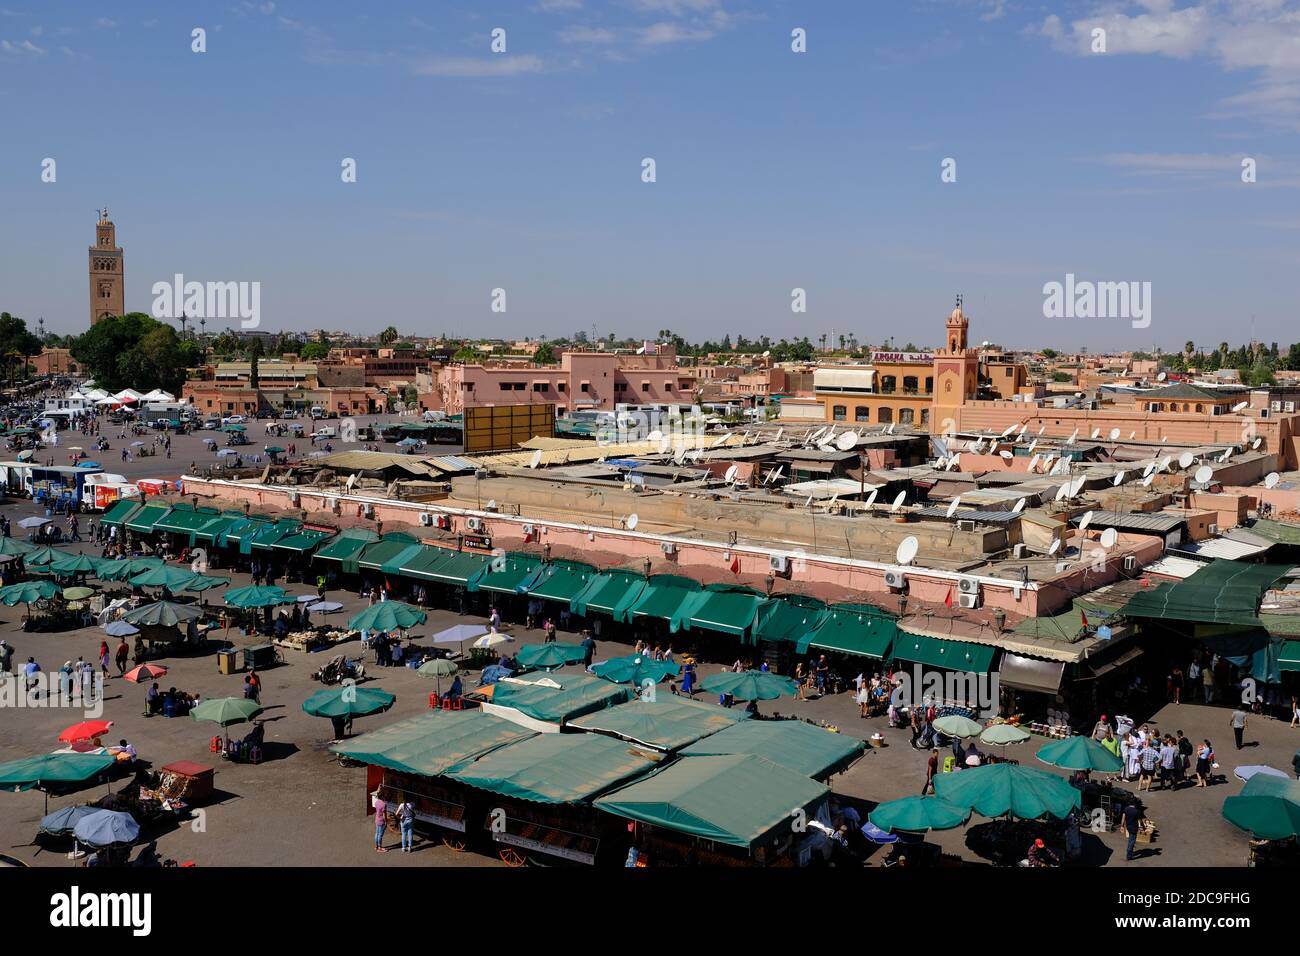 Morocco Marrakesh - Panoramic view to Djemaa el Fna Square and market Stock Photo